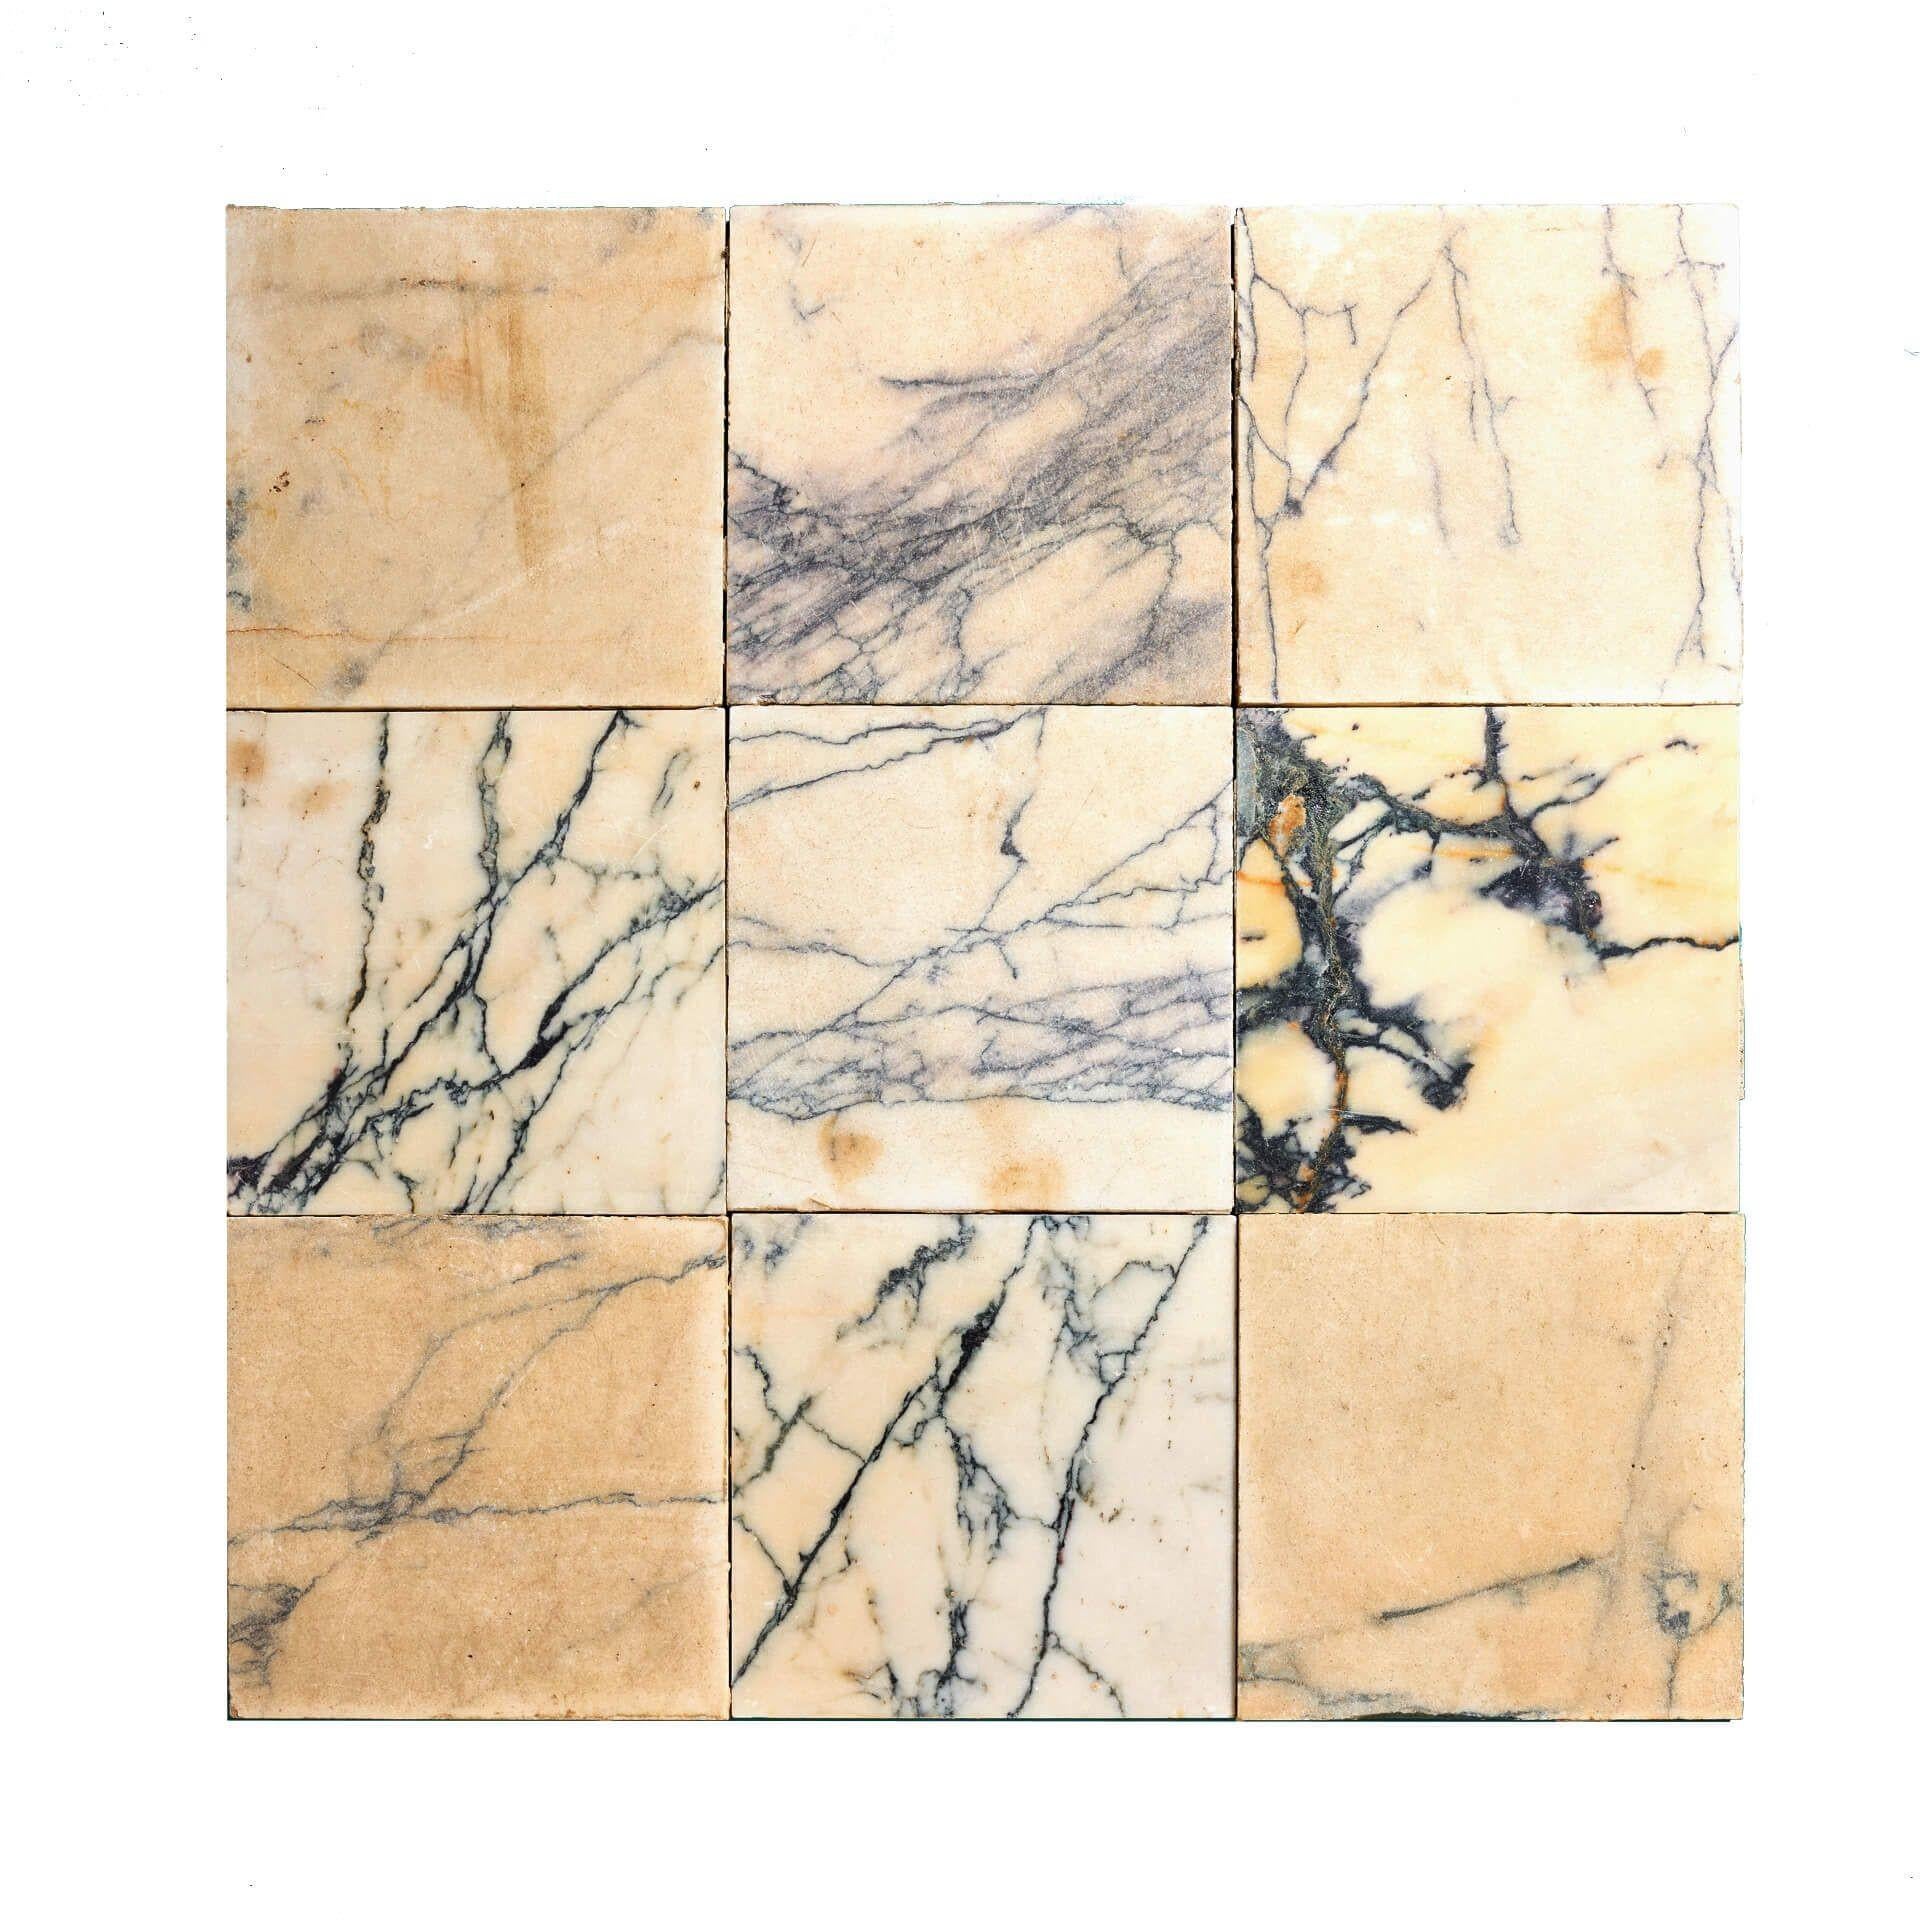 These late 19th century reclaimed Italian floor tiles in Breccia marble were salvaged from Wingfield castle in England.

Dating from circa 1880, these reclaimed floor tiles are of a Italianate style, made in smooth Breccia marble, and detailed with